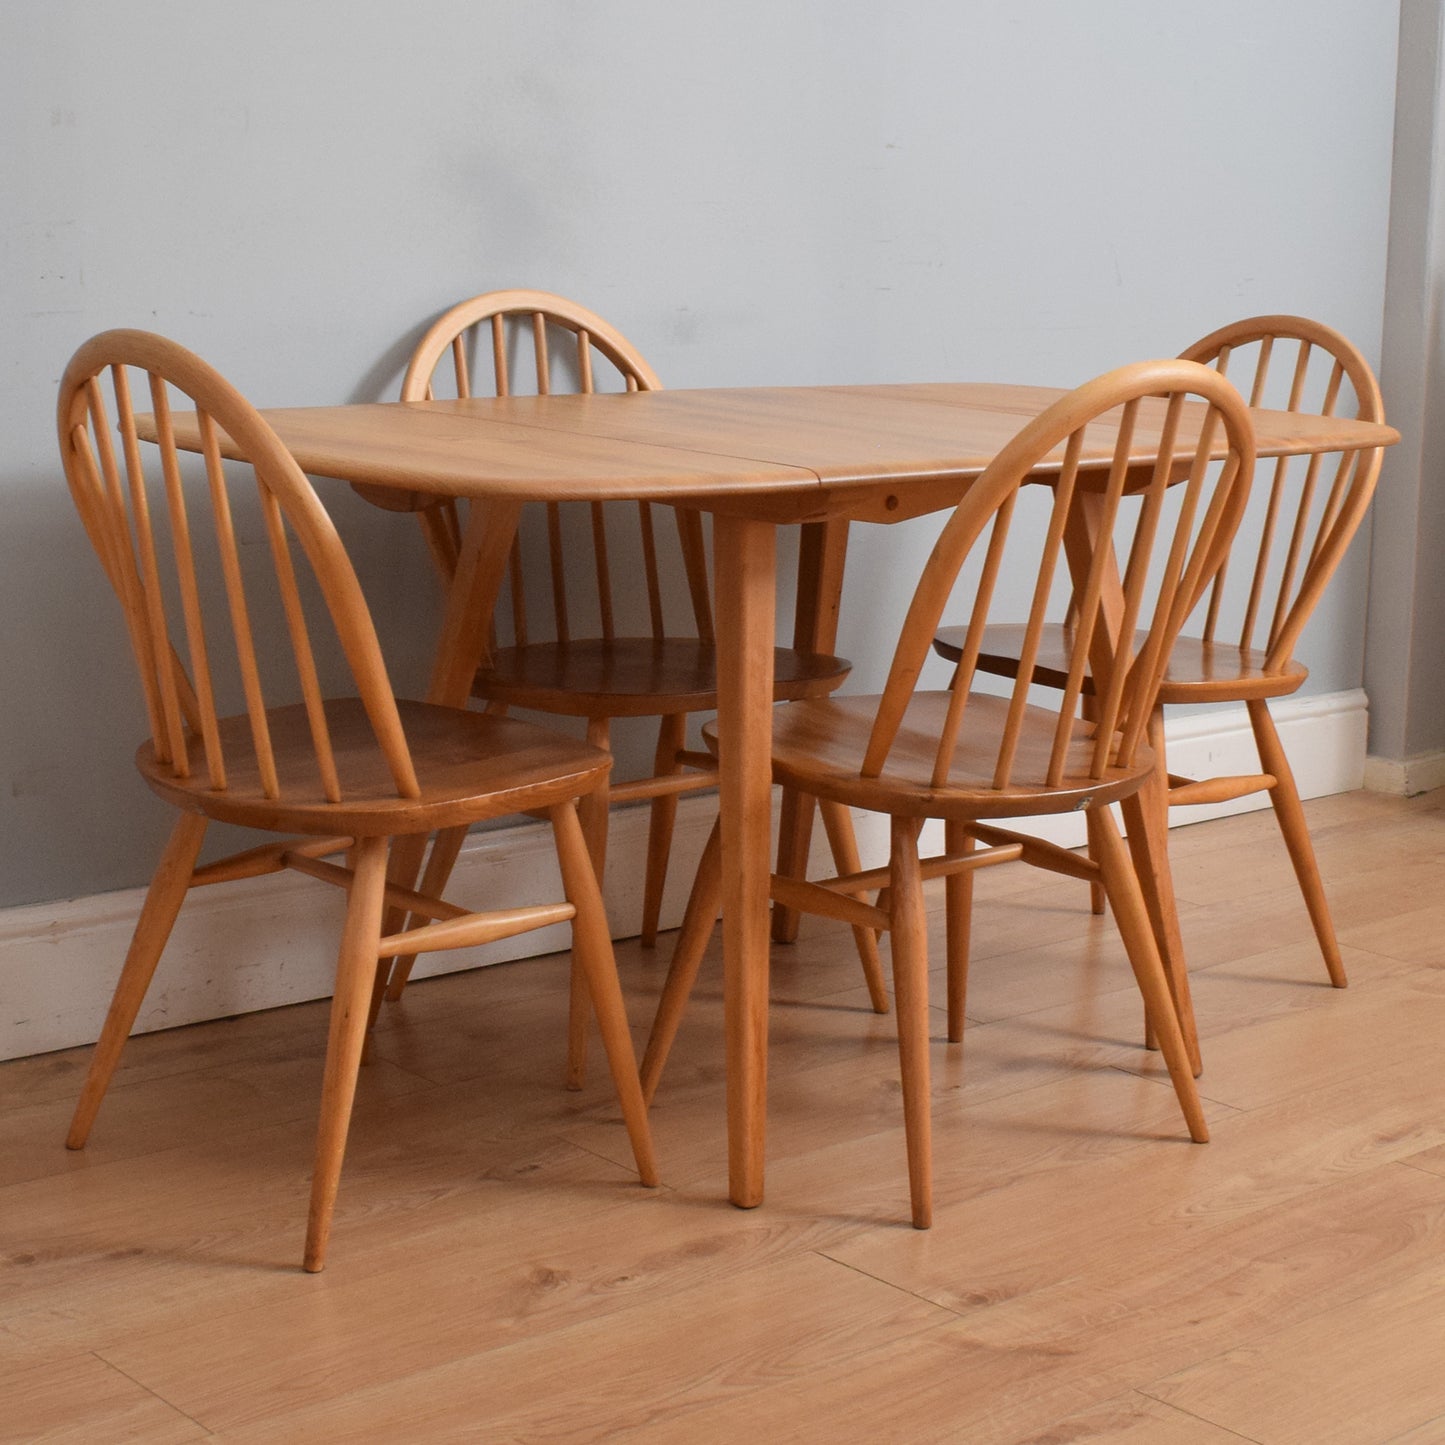 Ercol Model 383 Table and Four Chairs